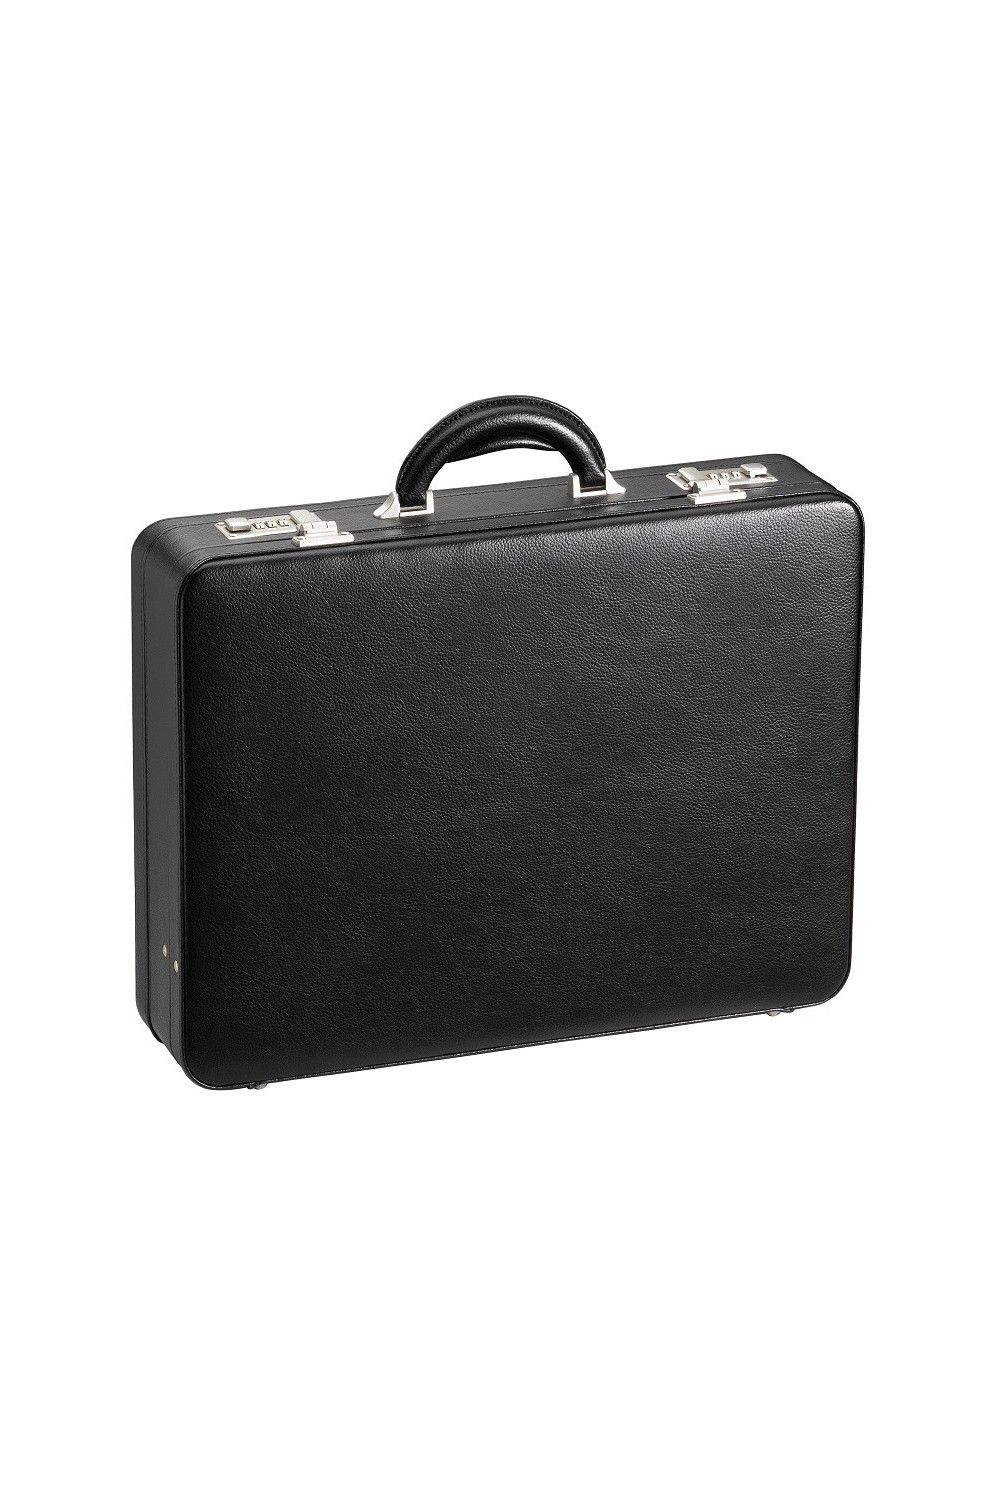 D & N briefcase finely grained PU 2629